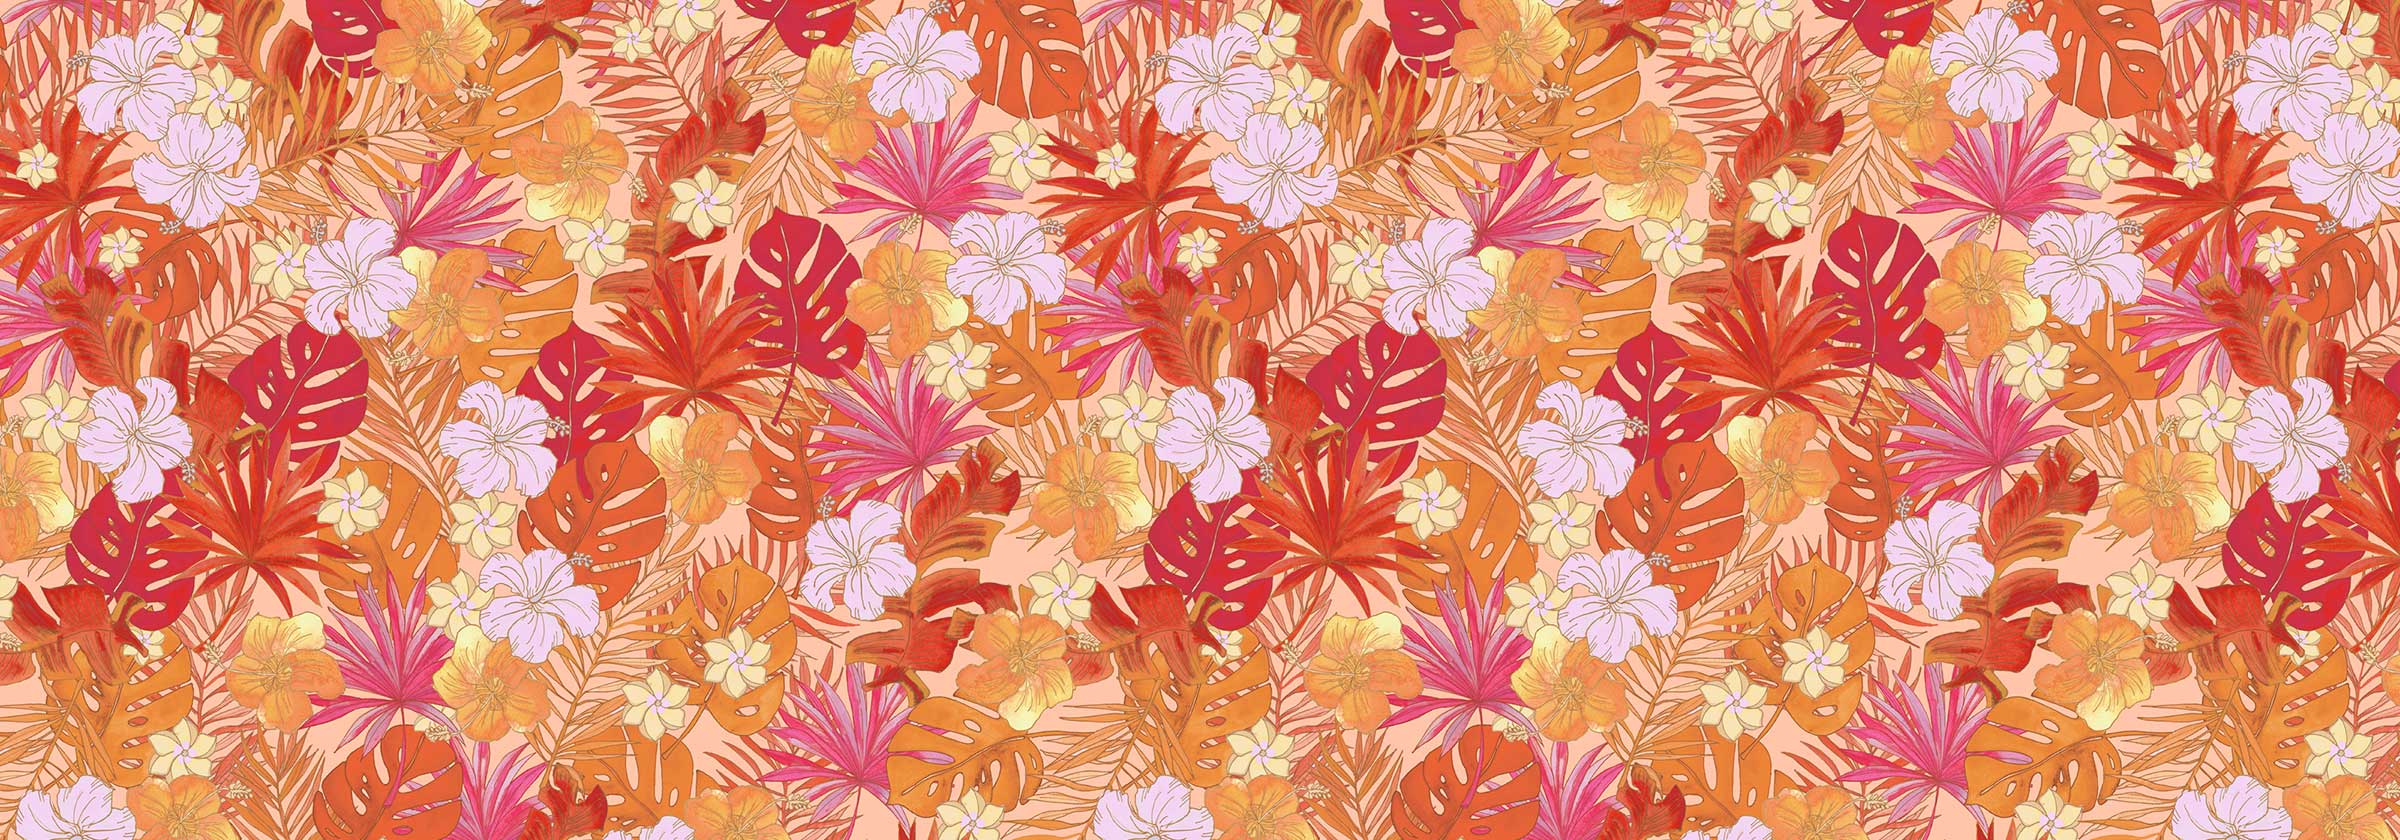 Floral - Woven Fabric - HD Wallpaper 